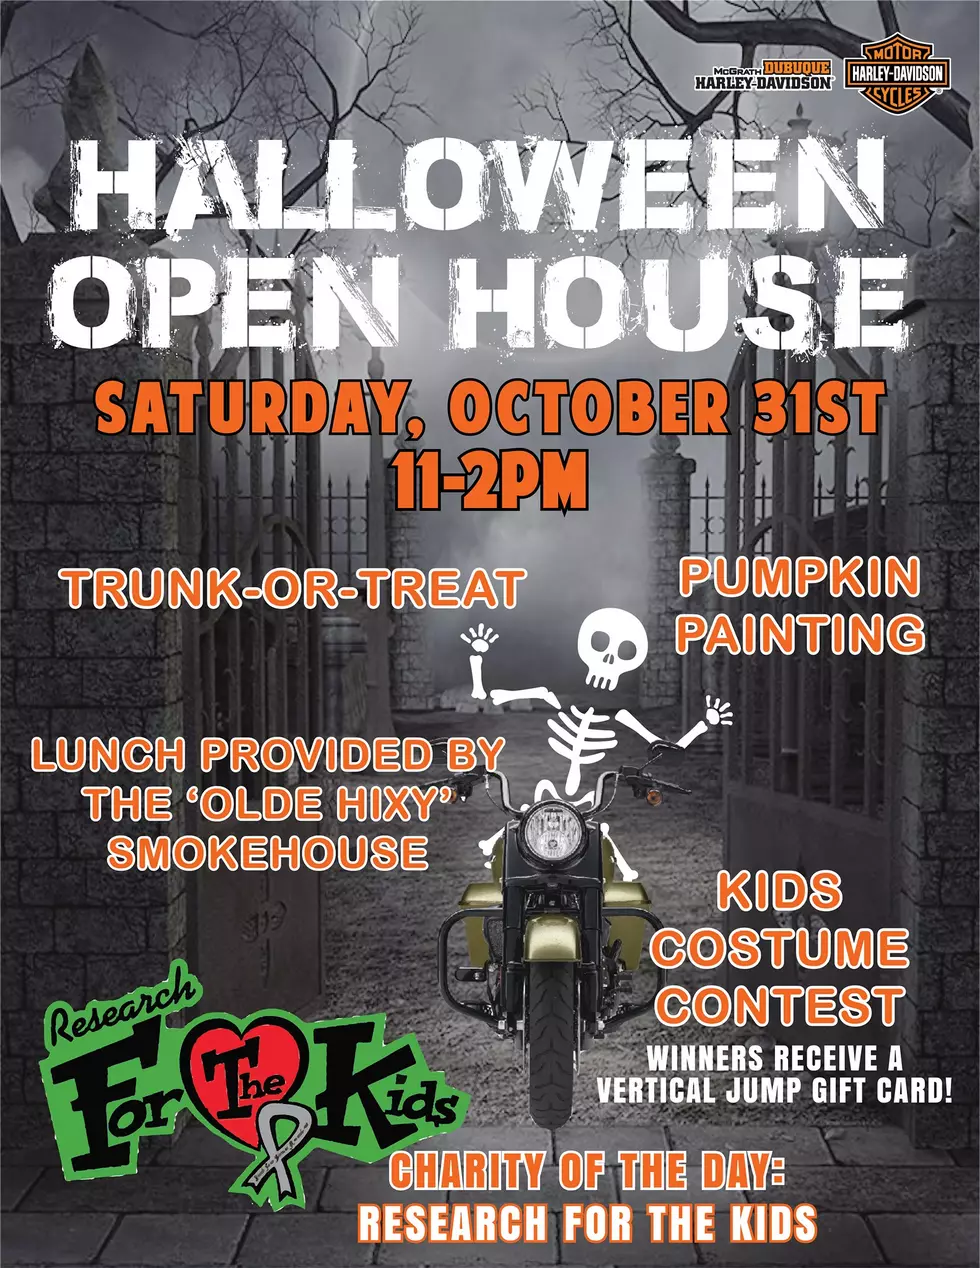 Safe Trunk or Treat Event This Saturday at McGrath Harley-Davidson